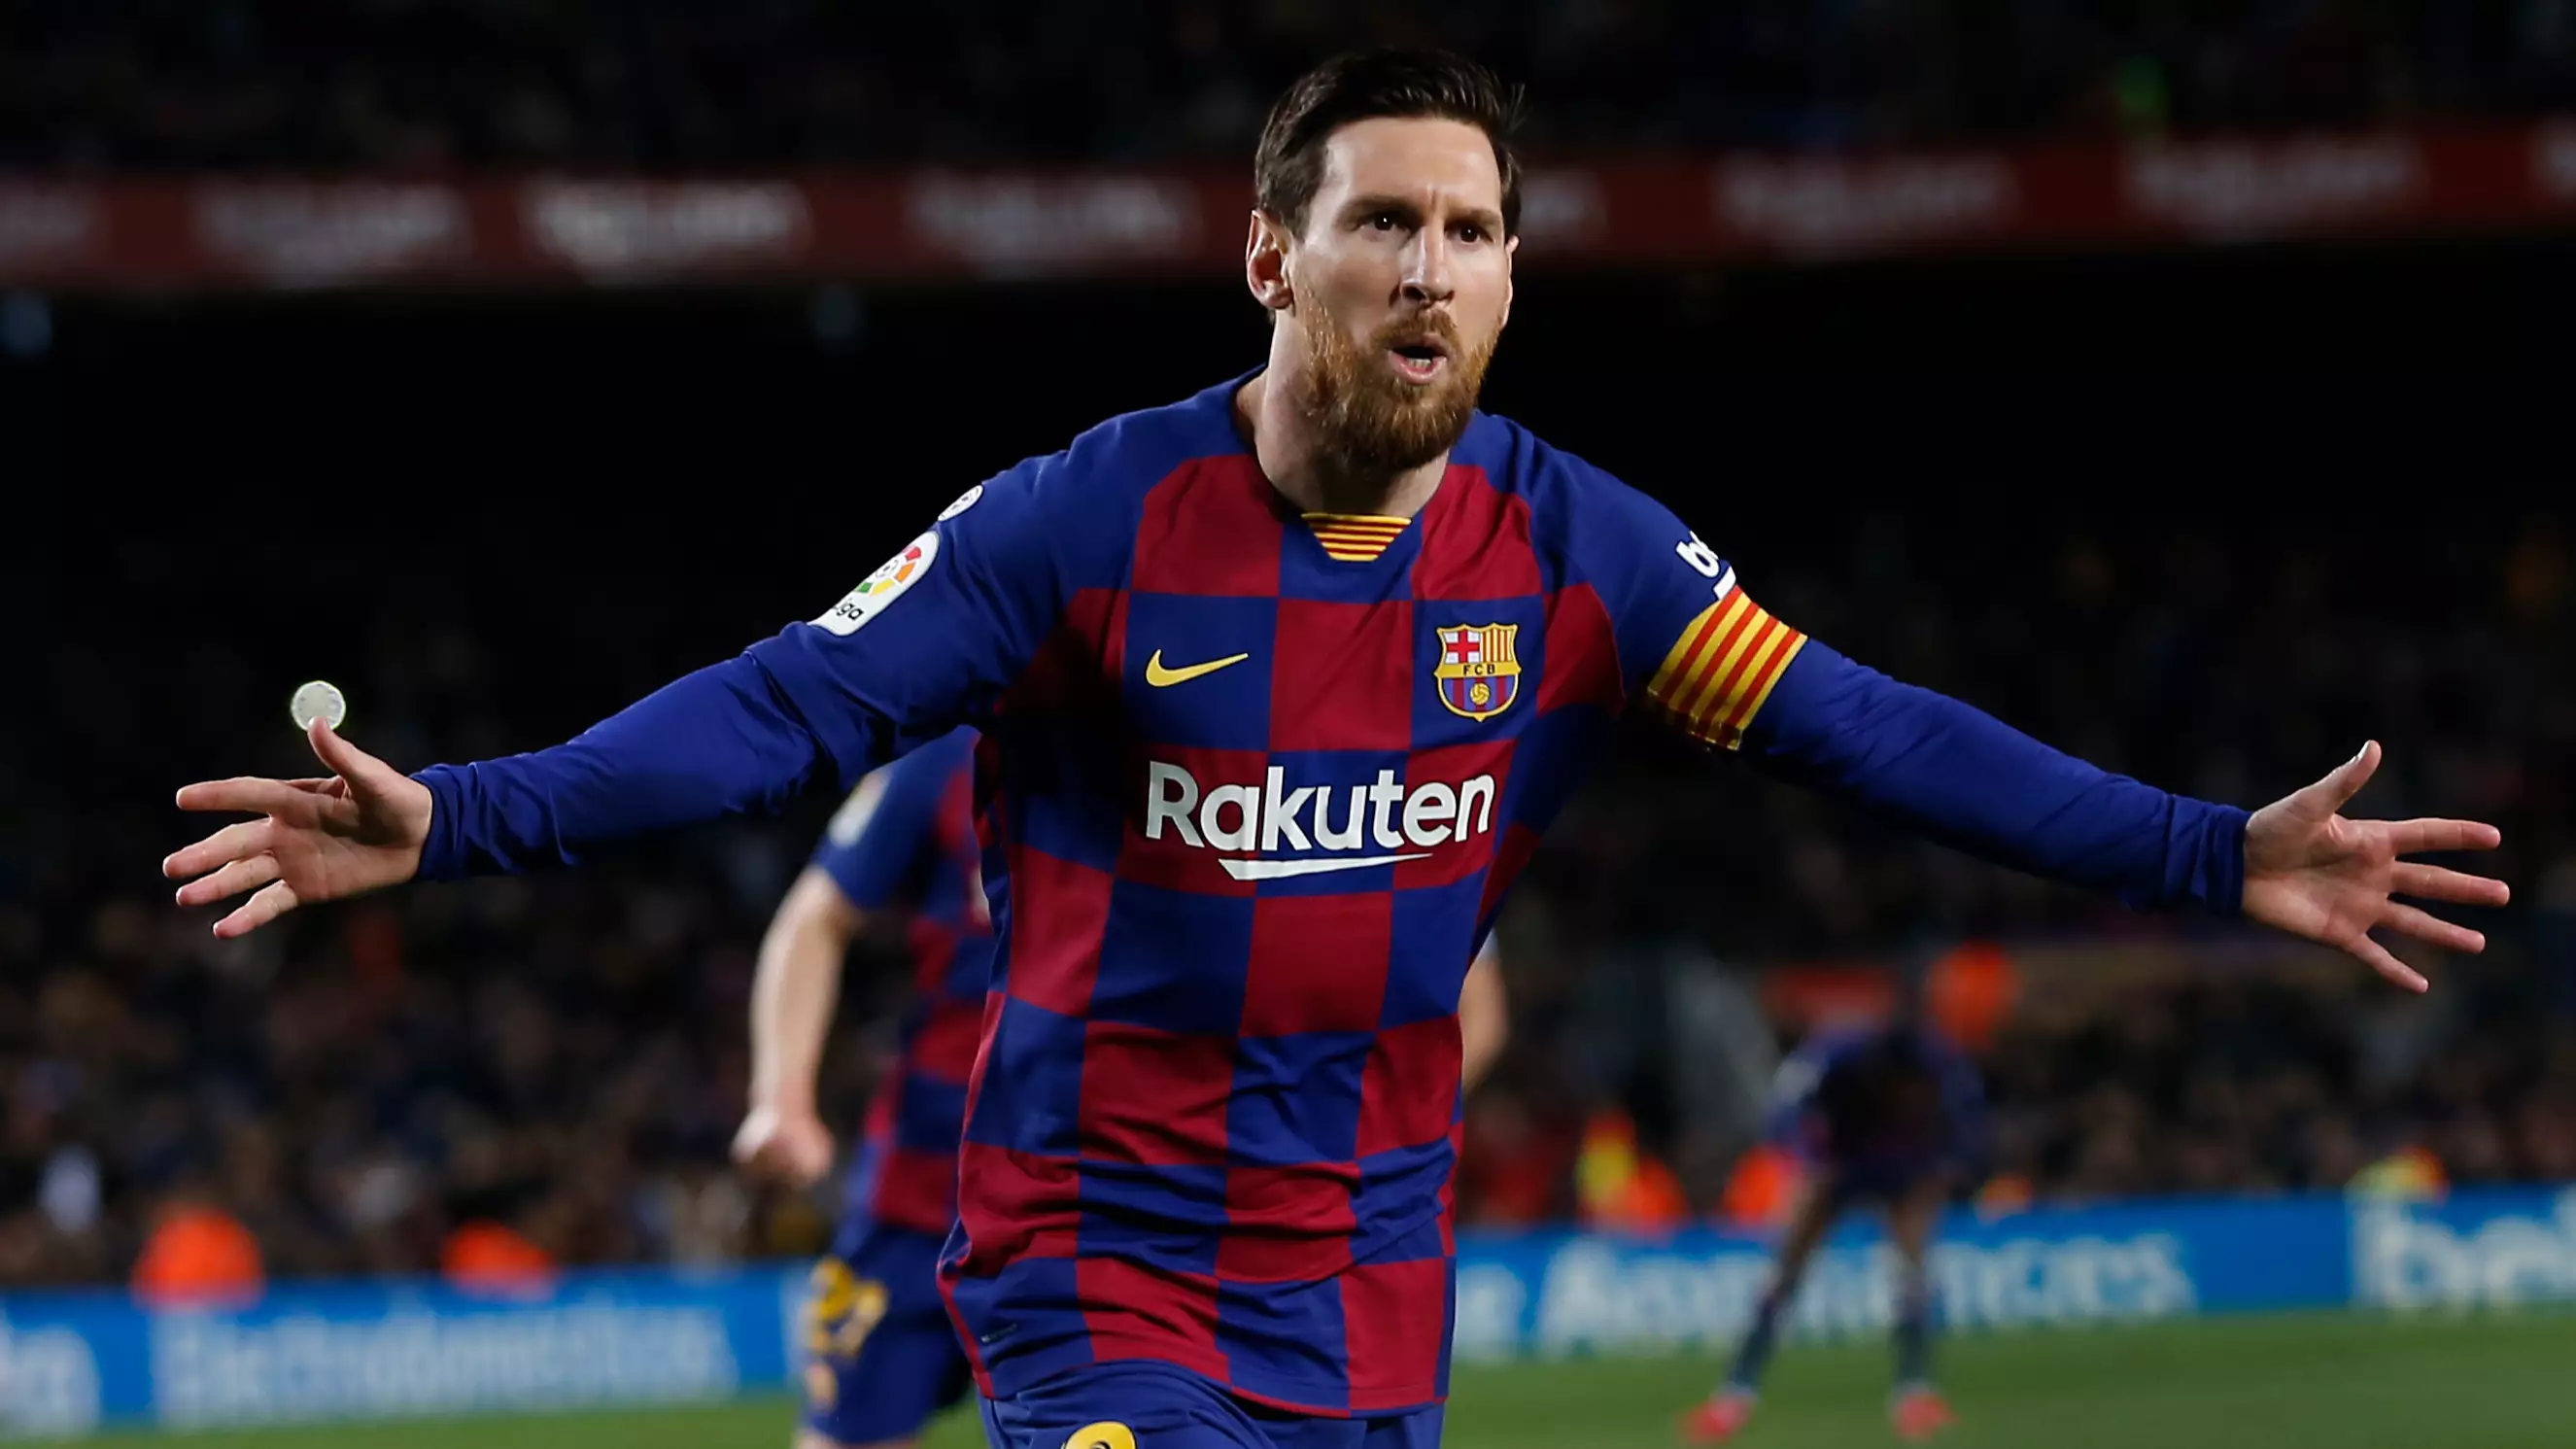 Lionel Messi Is Now The All-Time Top Scorer In Top Five European Leagues